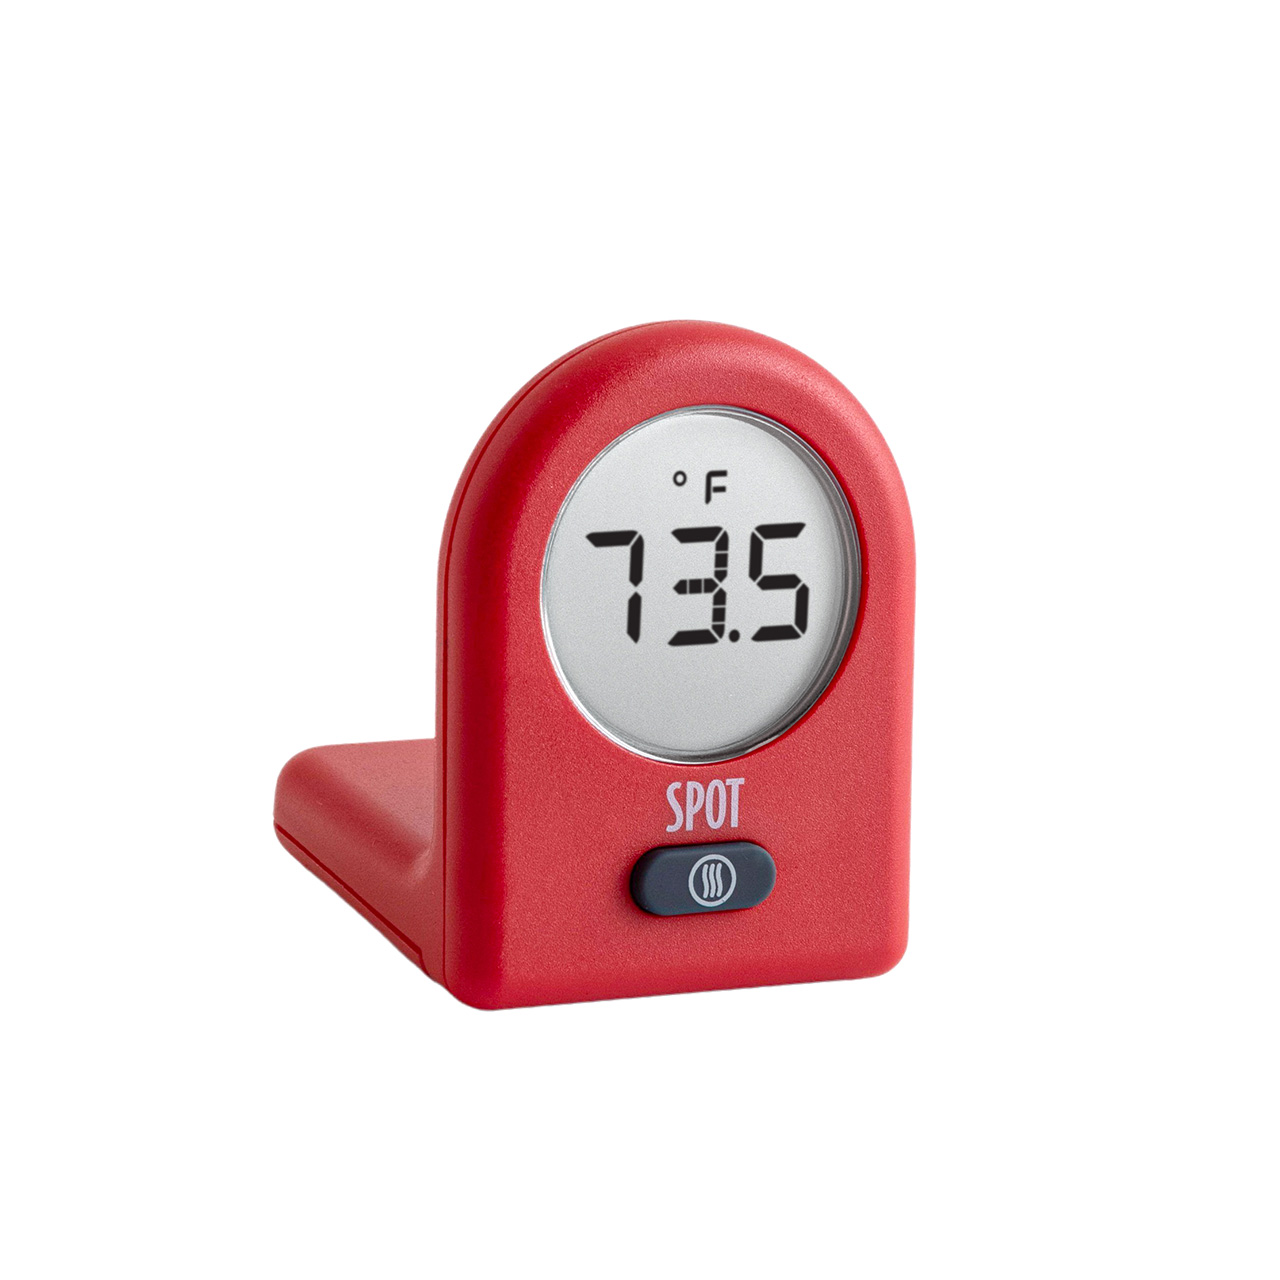 ThermoWorks- Fridge or Freezer Thermometer – The Happy Cook